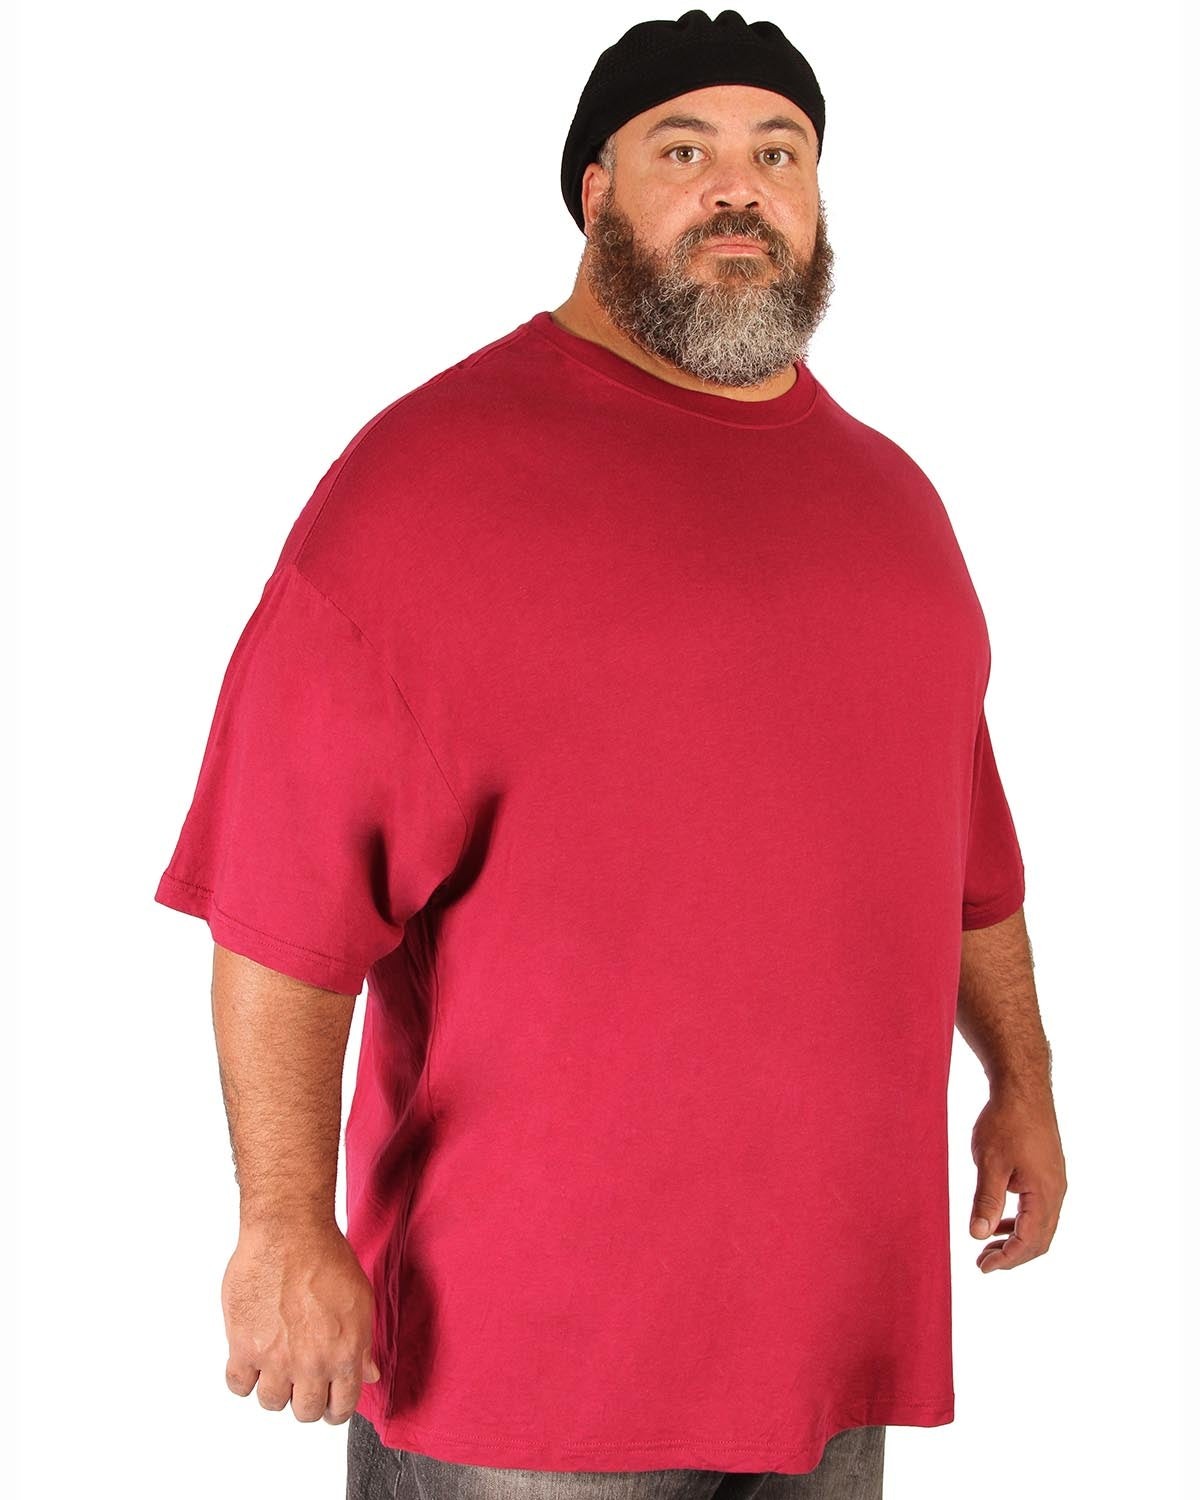 You're going to love Big Boy Bamboo incredibly durable bamboo t-shirts